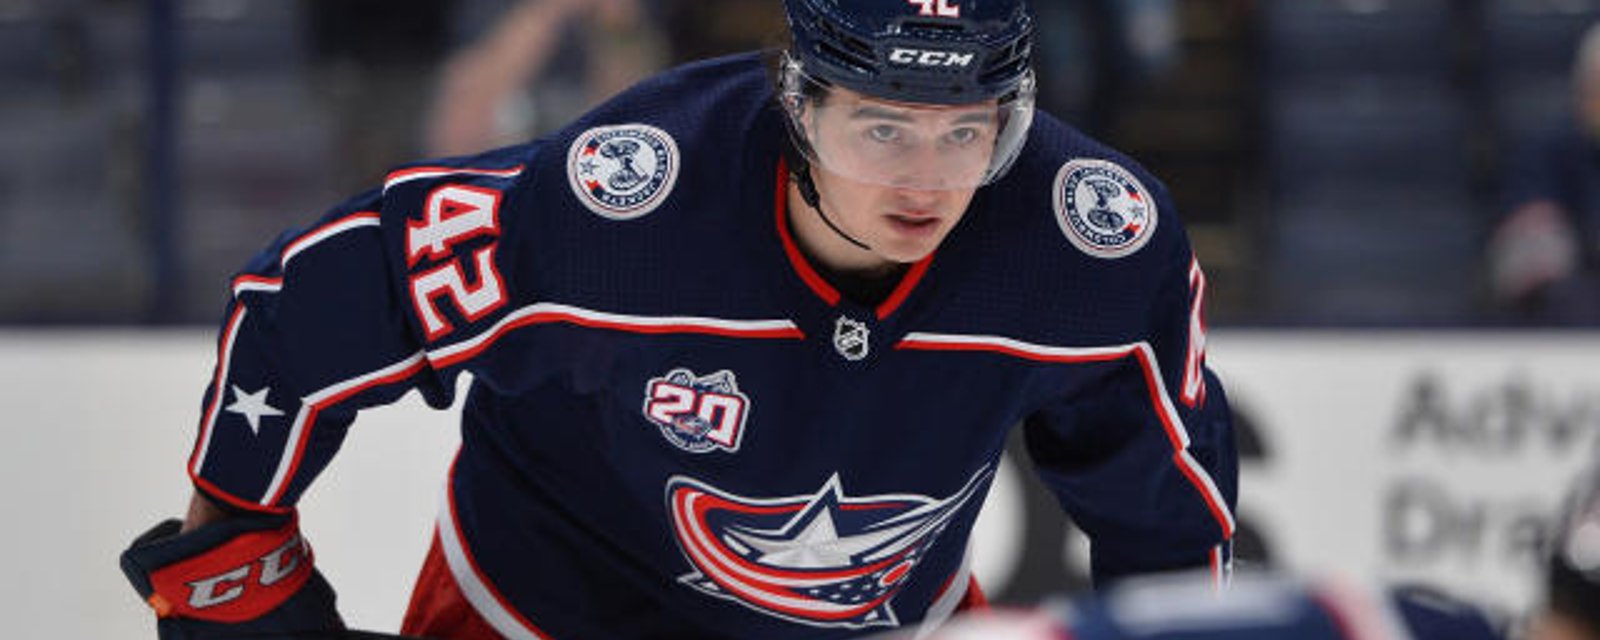 We finally know the real reason why Texier left the Blue Jackets